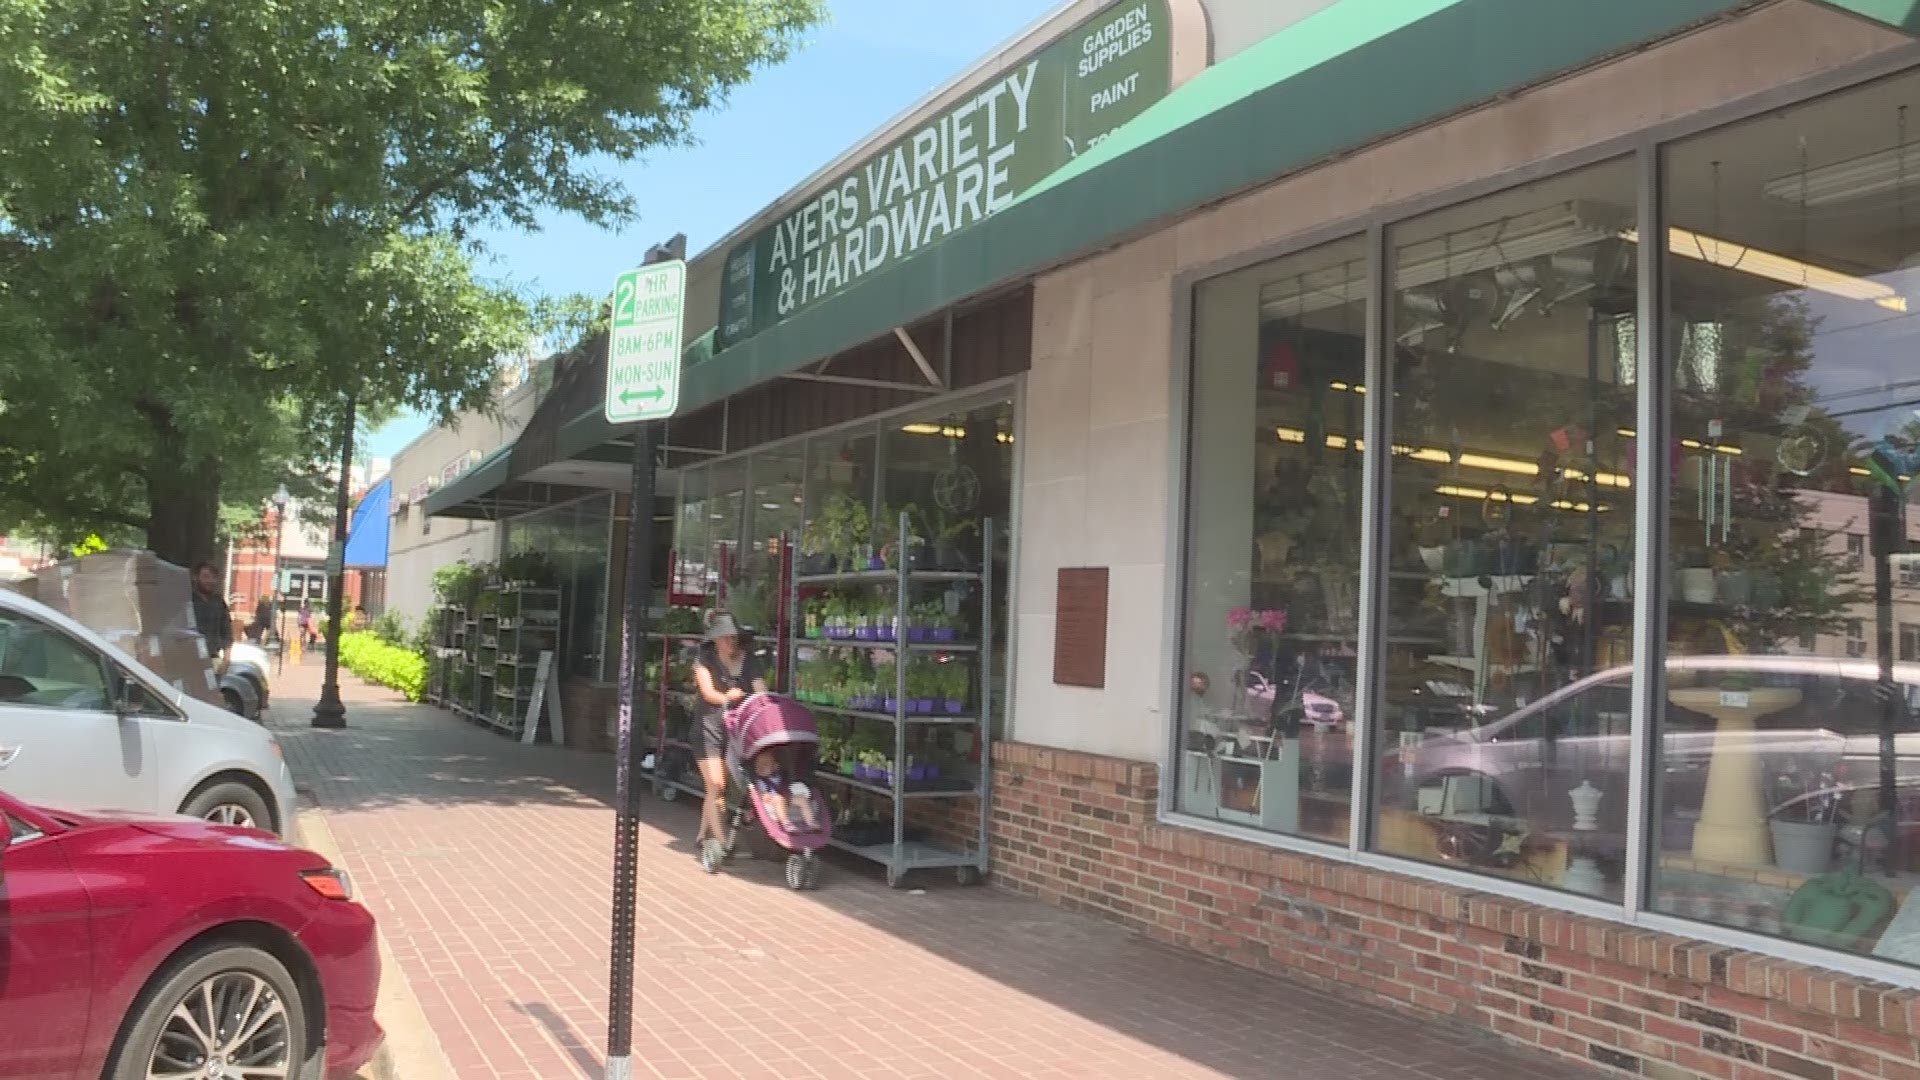 Employees of the well-known local businesses are working hard to get their doors open again. But some wonder if they'll survive following the damaging weather.